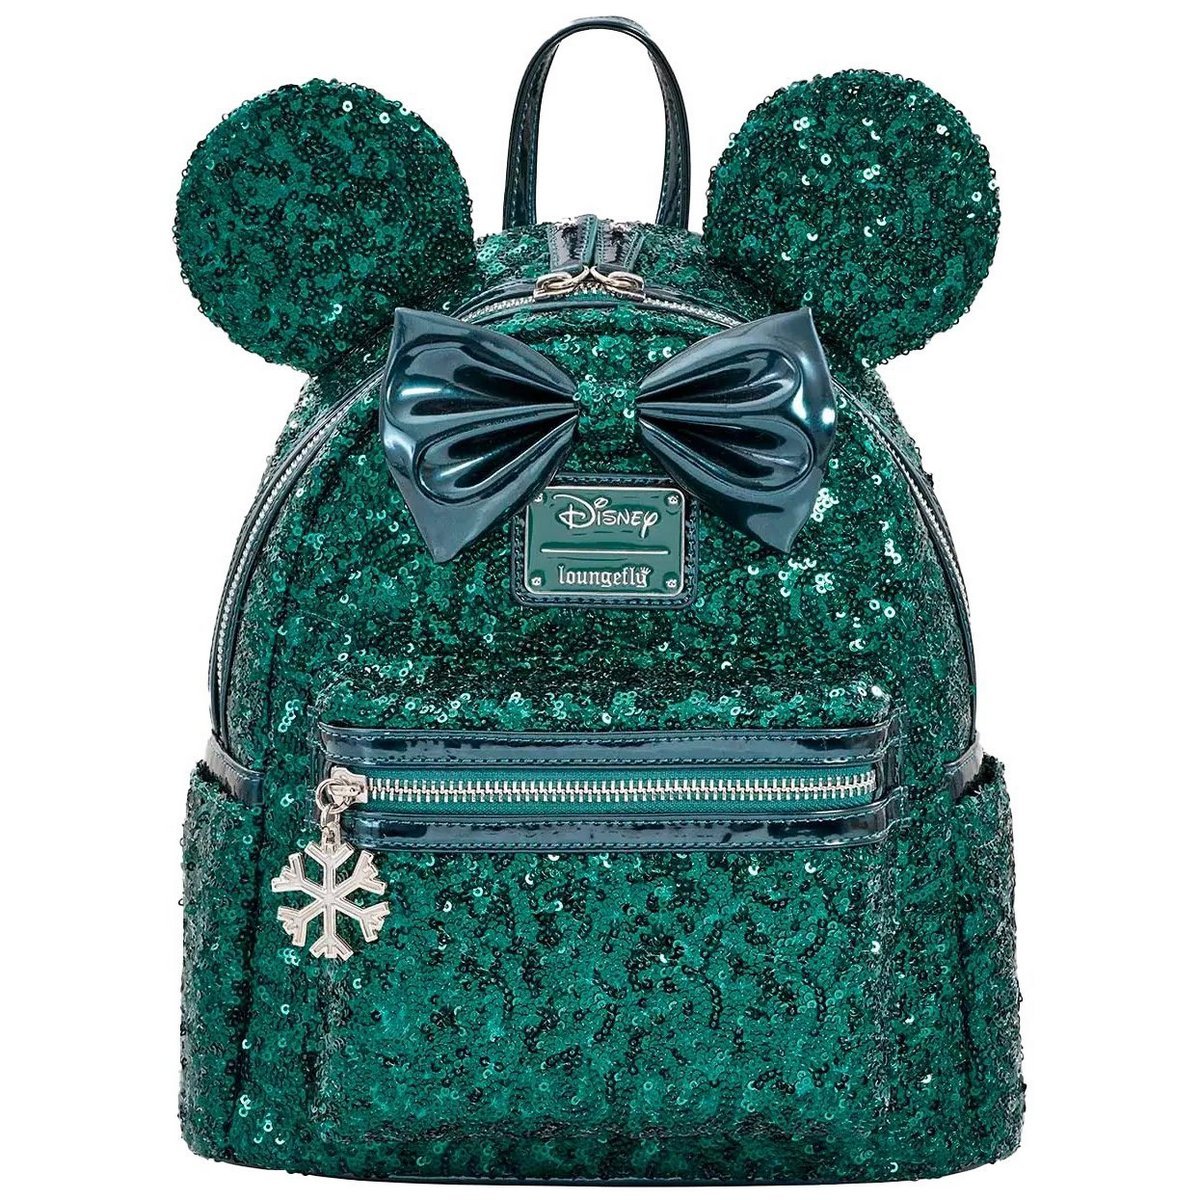 Minnie Mouse Emerald Green Sequin